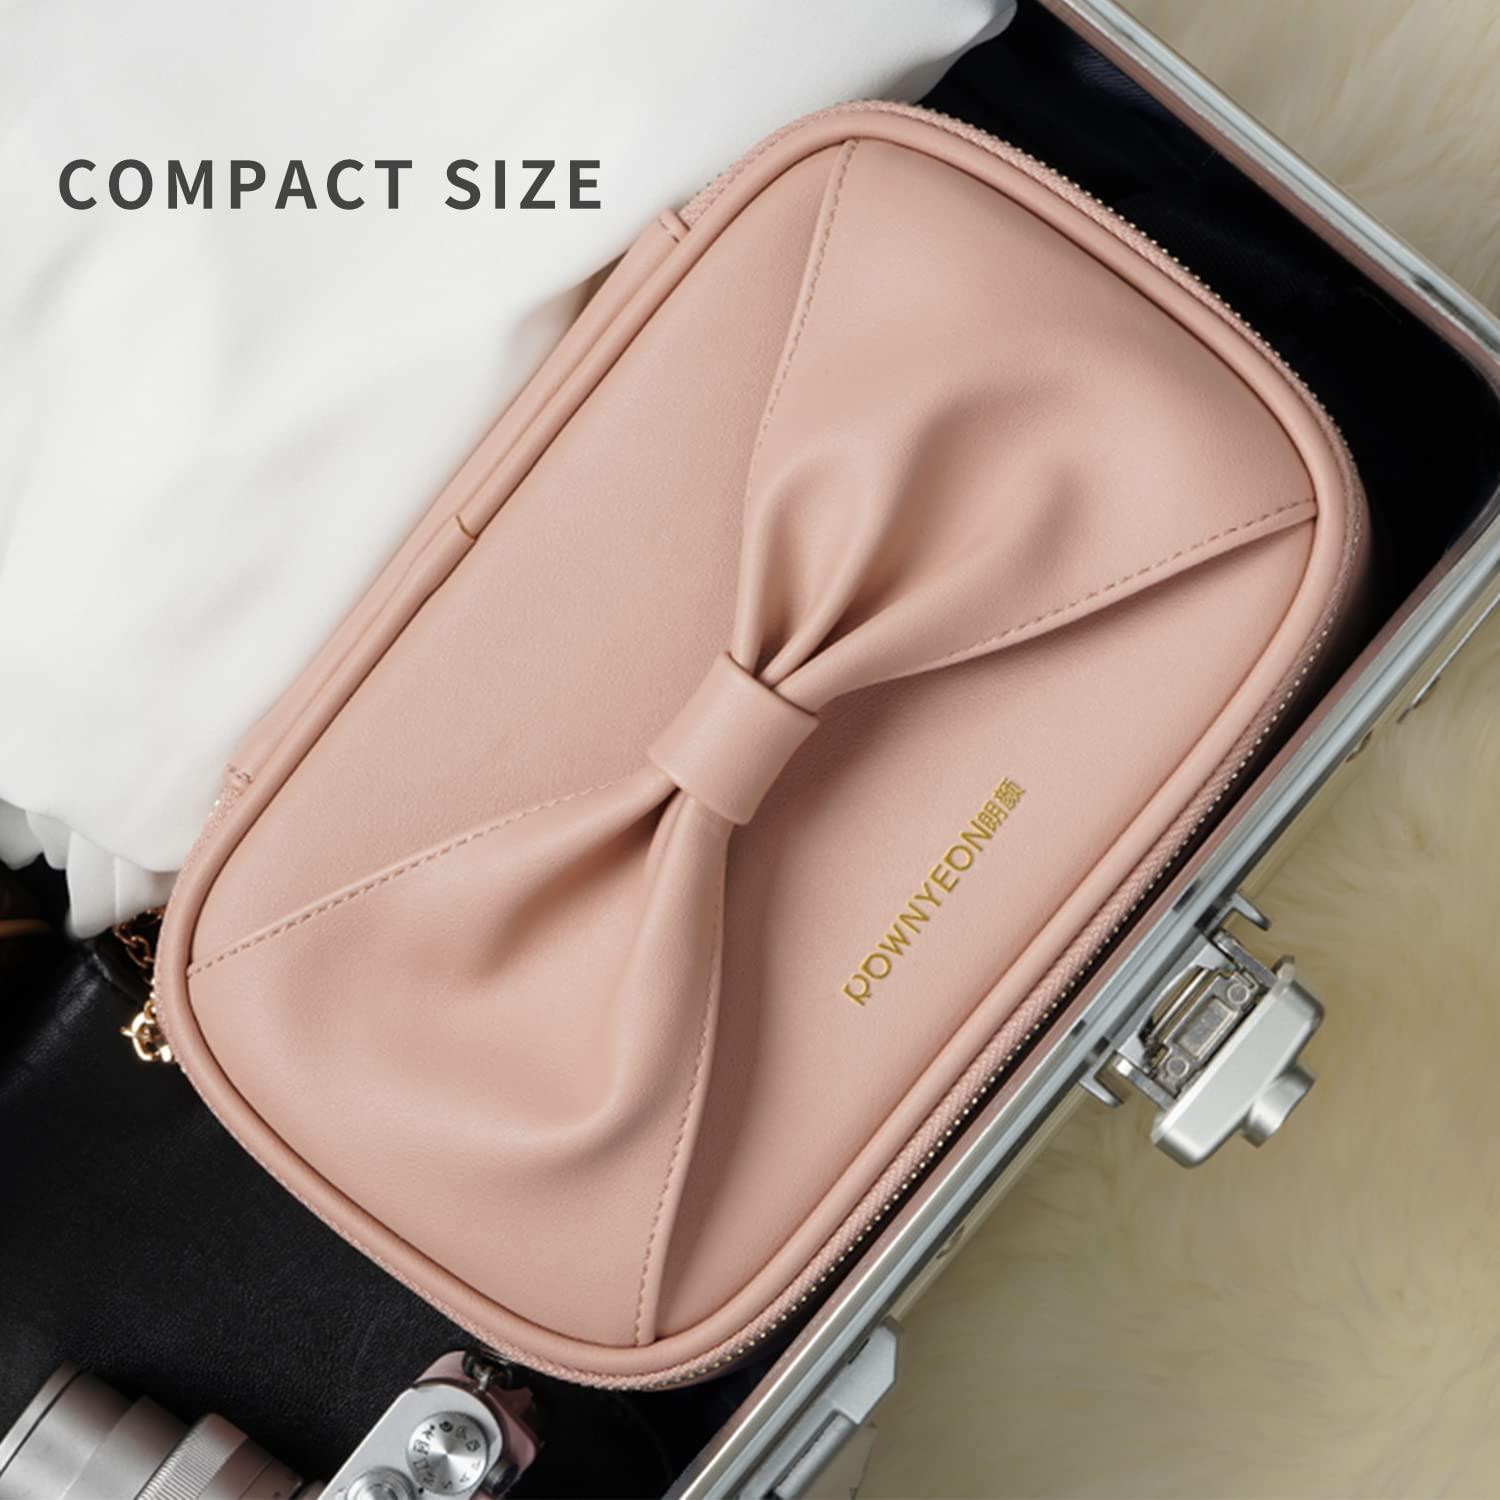 ROWNYEON Travel Makeup Bag Cute Organizer Bag Makeup Bag with Brush  Organizer Bow-knot Handle Portable Waterproof Toiletry Pouch Make up Case -  PINK